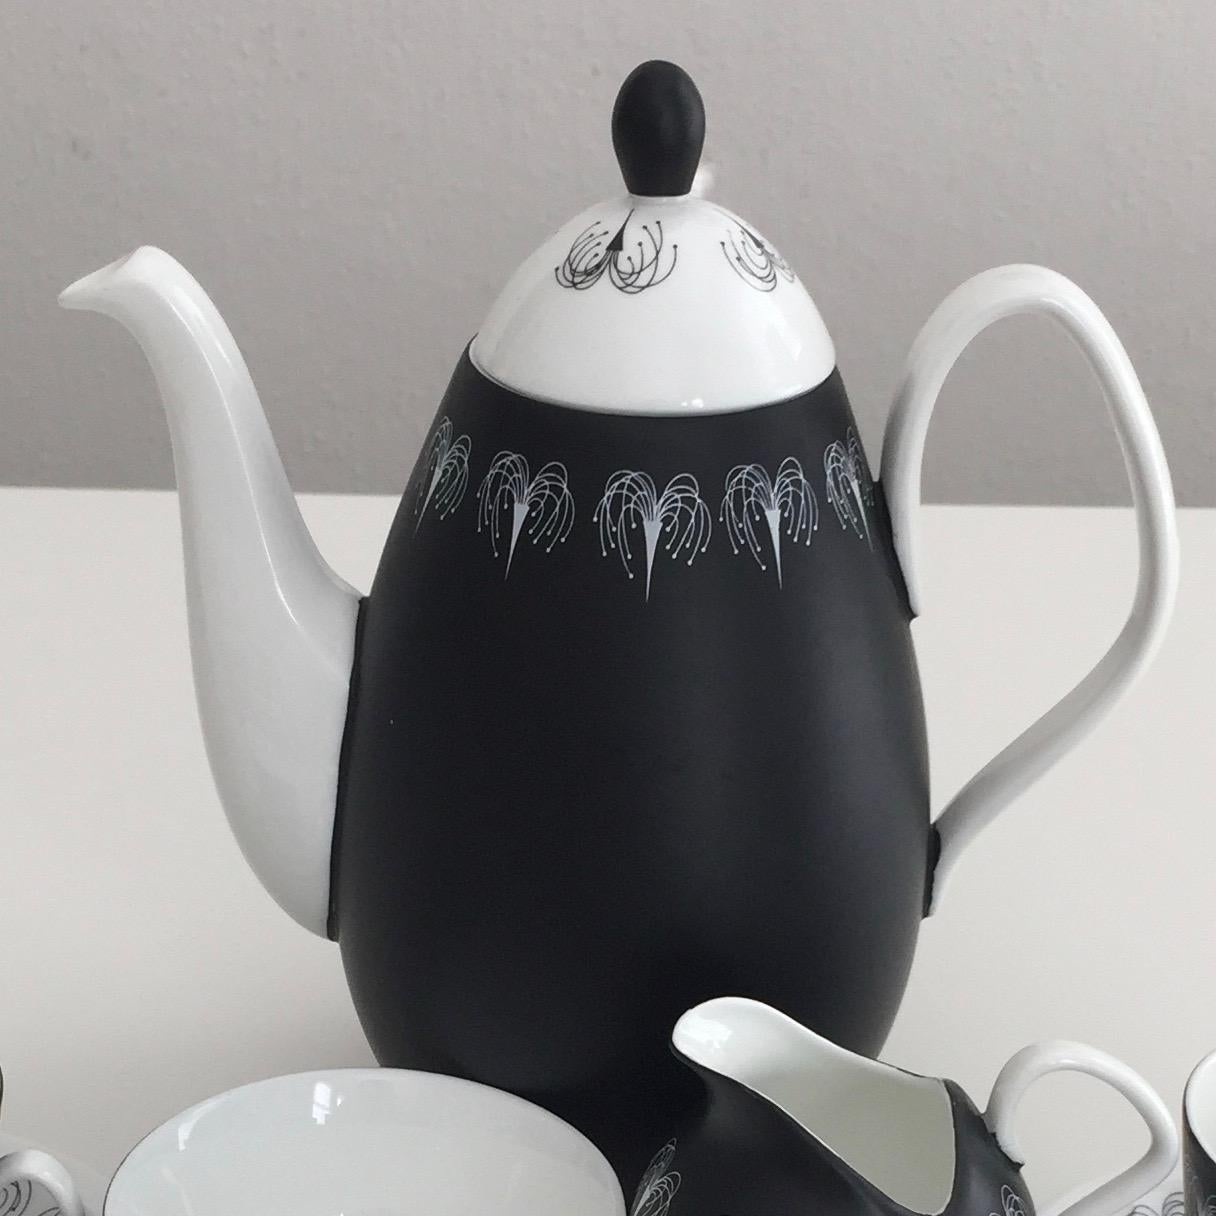 Mid-Century Modern Foley Porcelain Coffee Service, Black and White Domino Midcentury Modern ca 1960